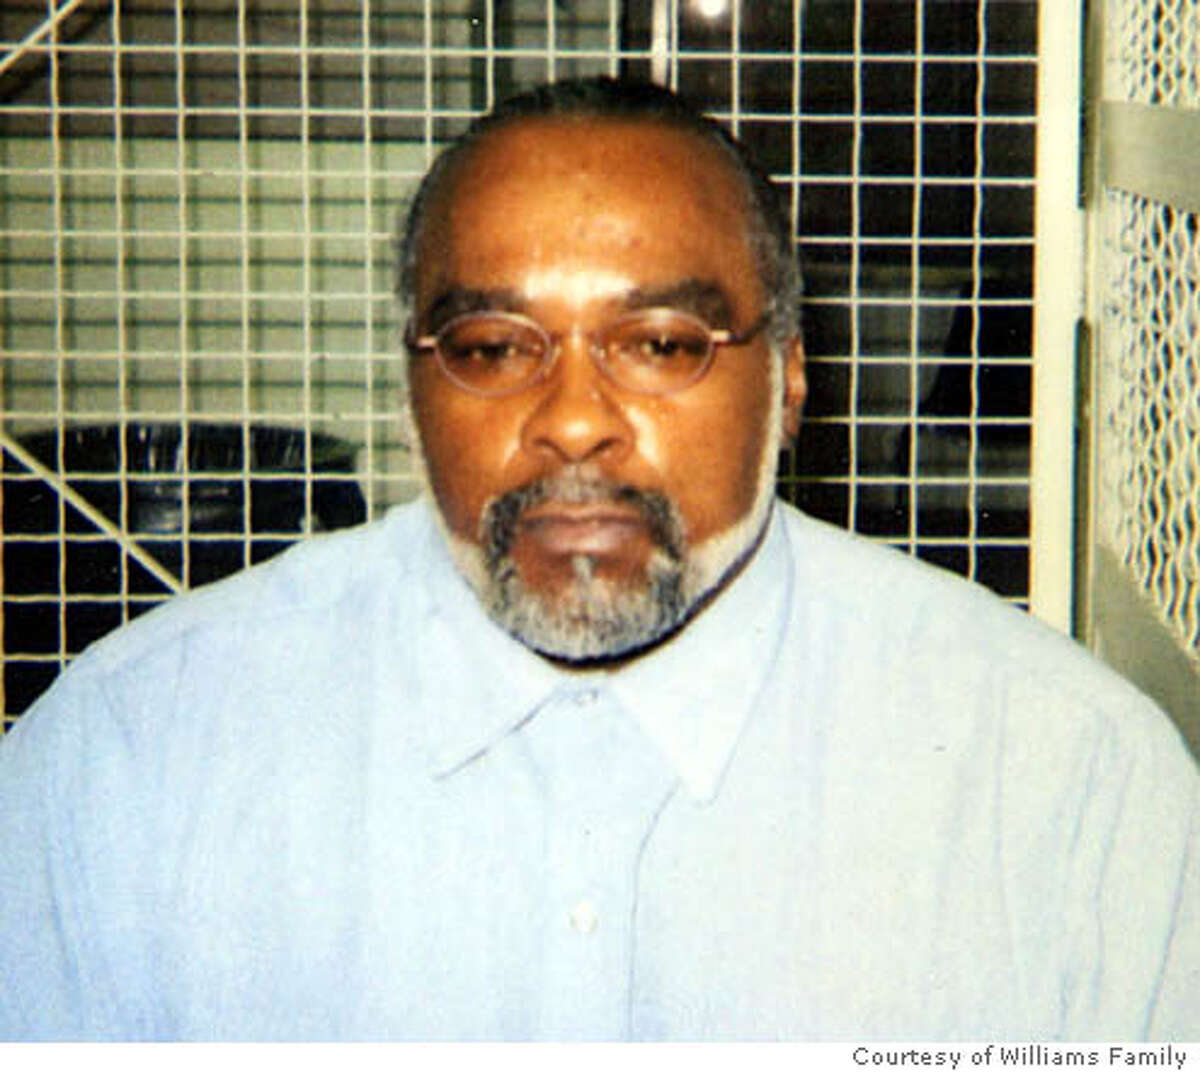 ** FILE ** In this undated photo provided by the family of Stanley Williams, Stanley "Tookie" Williams poses for a photo in the visiting area of San Quentin State Prison in California. Prosecutors asked the California Supreme Court on Sunday, Dec. 11, 2005 to reject former gang leader and convicted killer Williams' request to block his execution, set for early Tuesday. (AP Photo/Courtesy of Williams Family, File) Ran on: 12-12-2005 Ran on: 12-12-2005 Ran on: 12-13-2005 Ran on: 12-13-2005 Ran on: 12-13-2005 UNDATED HANDOUT